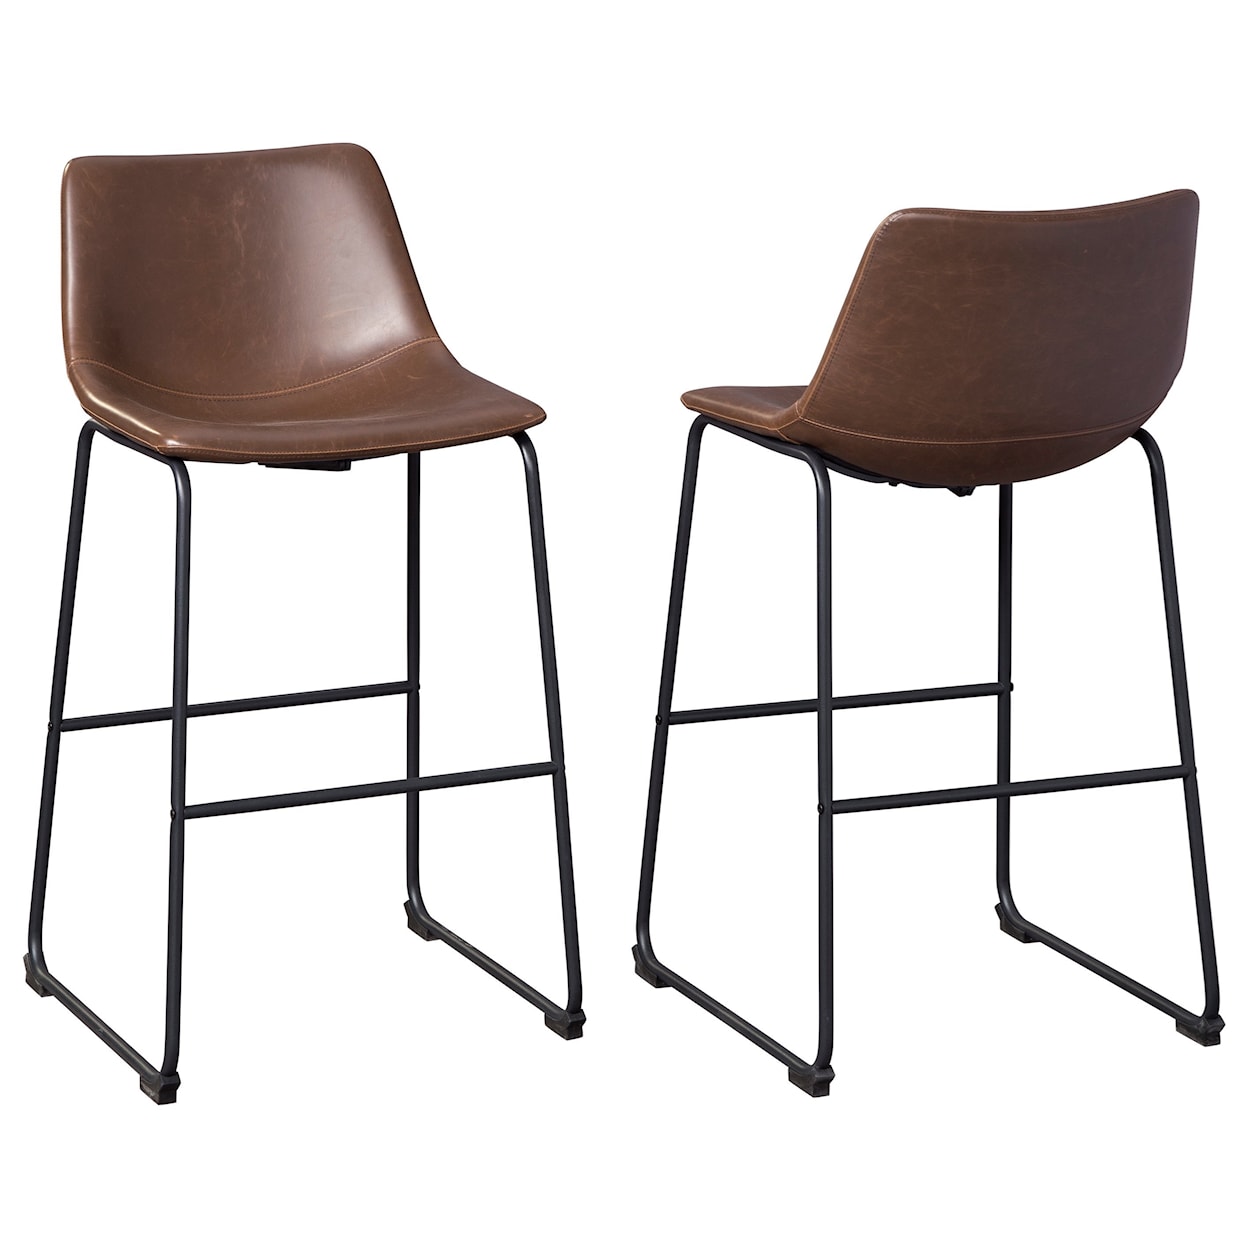 Signature Design by Ashley Centiar Tall Upholstered Barstool